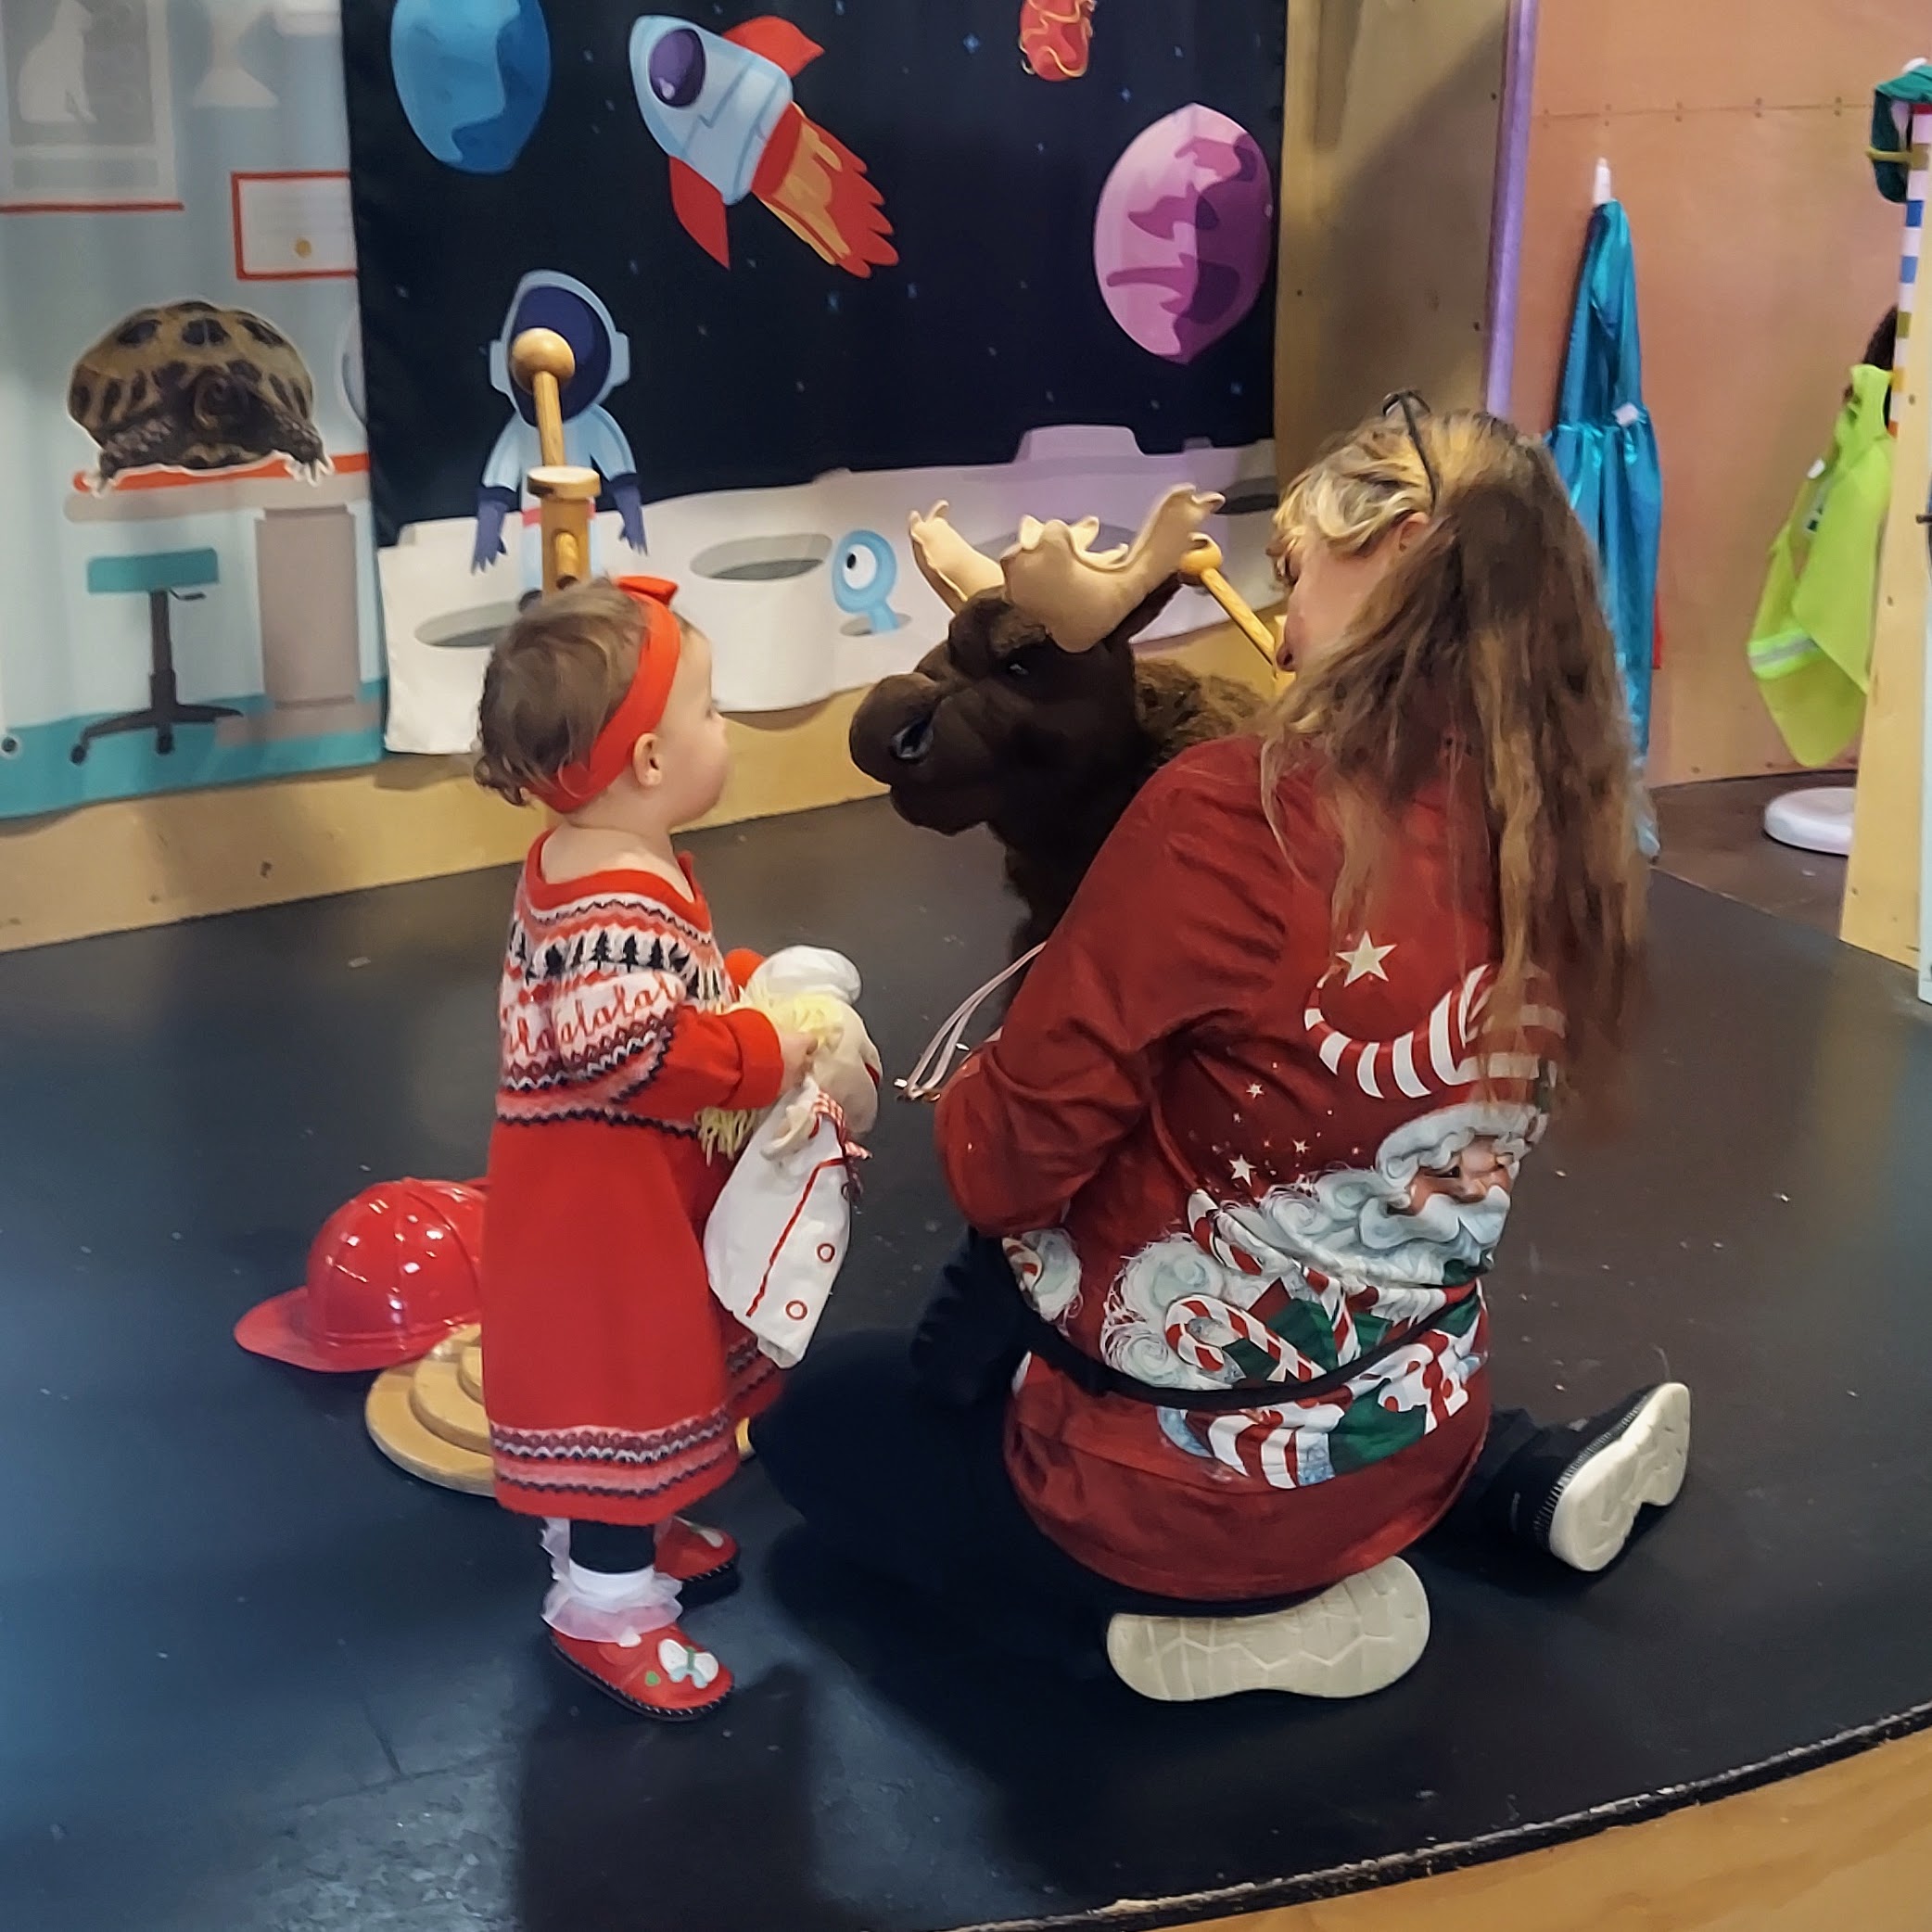 A woman manipulates a moose puppet, showing it to a young child in a red dress.